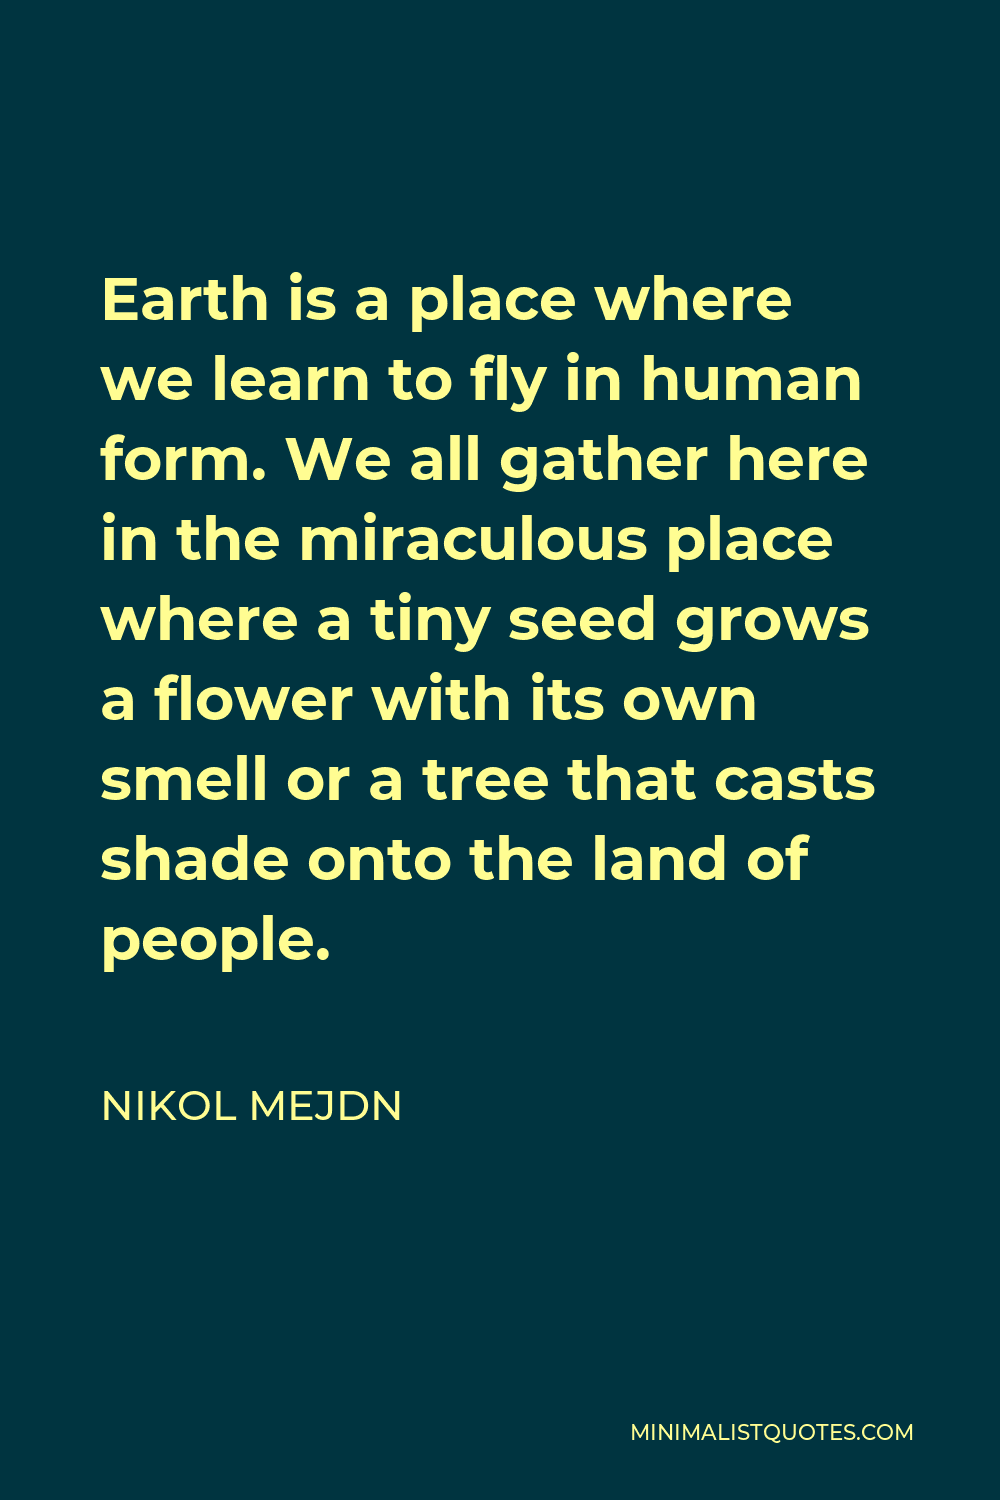 Nikol Mejdn Quote - Earth is a place where we learn to fly in human form. We all gather here in the miraculous place where a tiny seed grows a flower with its own smell or a tree that casts shade onto the land of people.